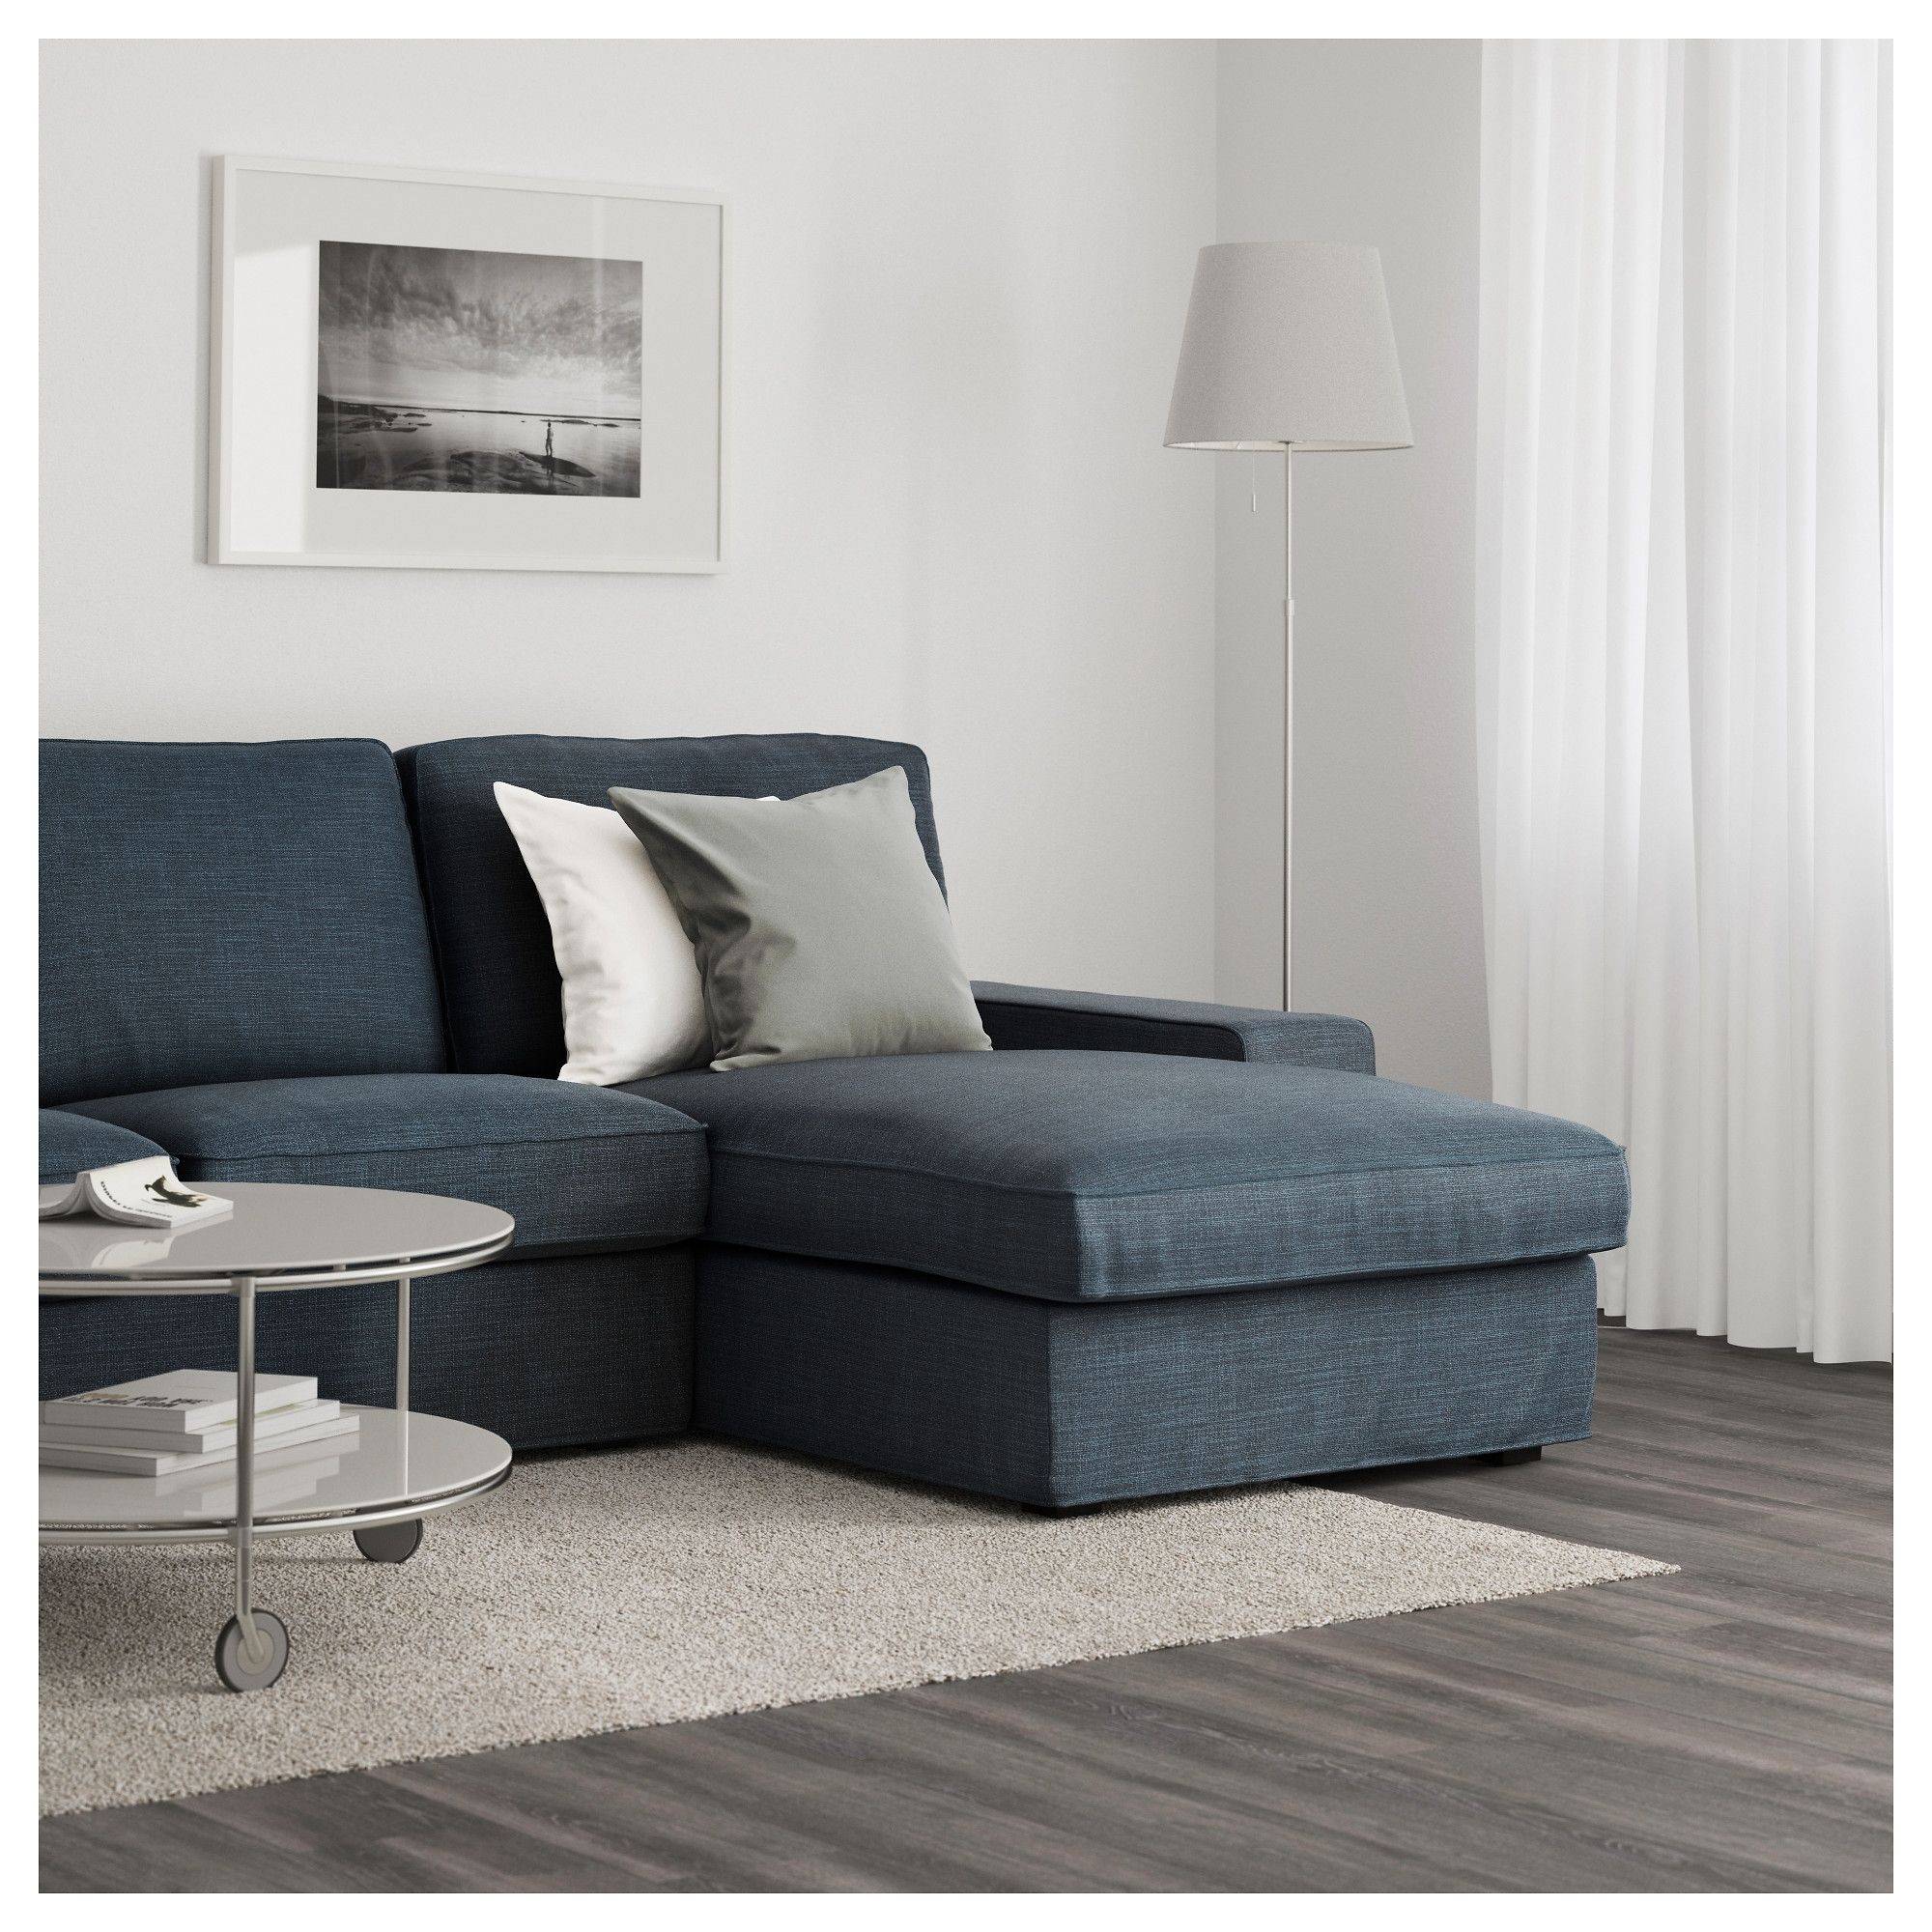 Ikea Kivik Chaises Throughout Best And Newest Kivik Sofa – With Chaise/hillared Beige – Ikea (Photo 3 of 15)